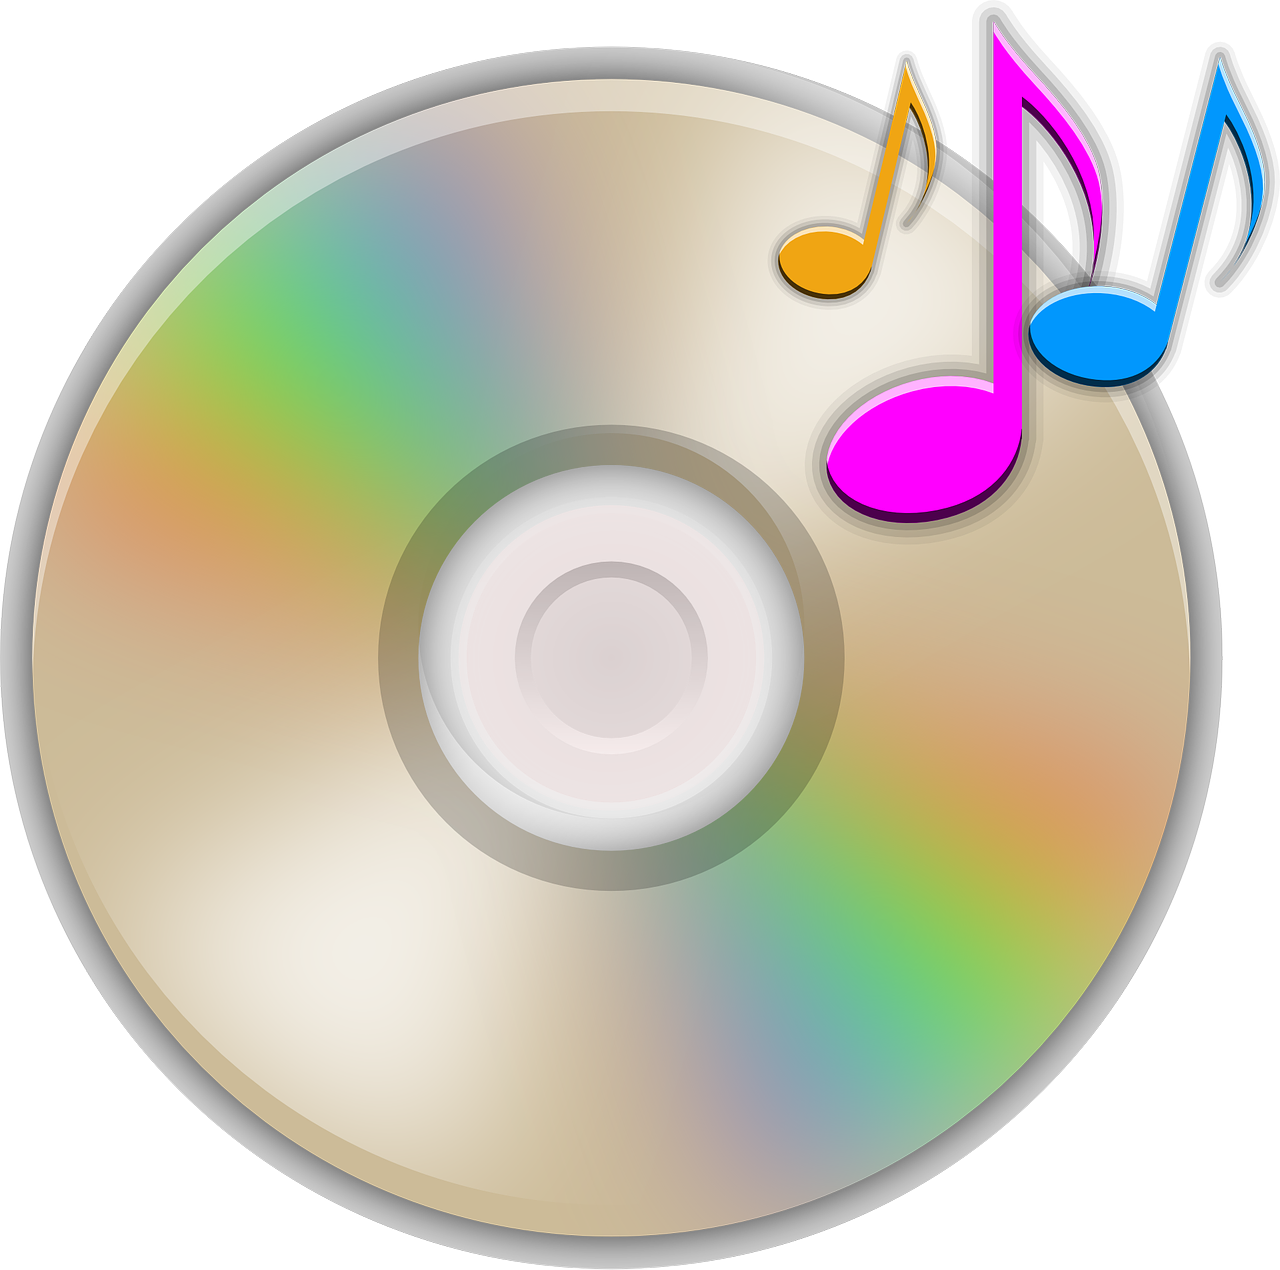 CD with music - twoverbs.com